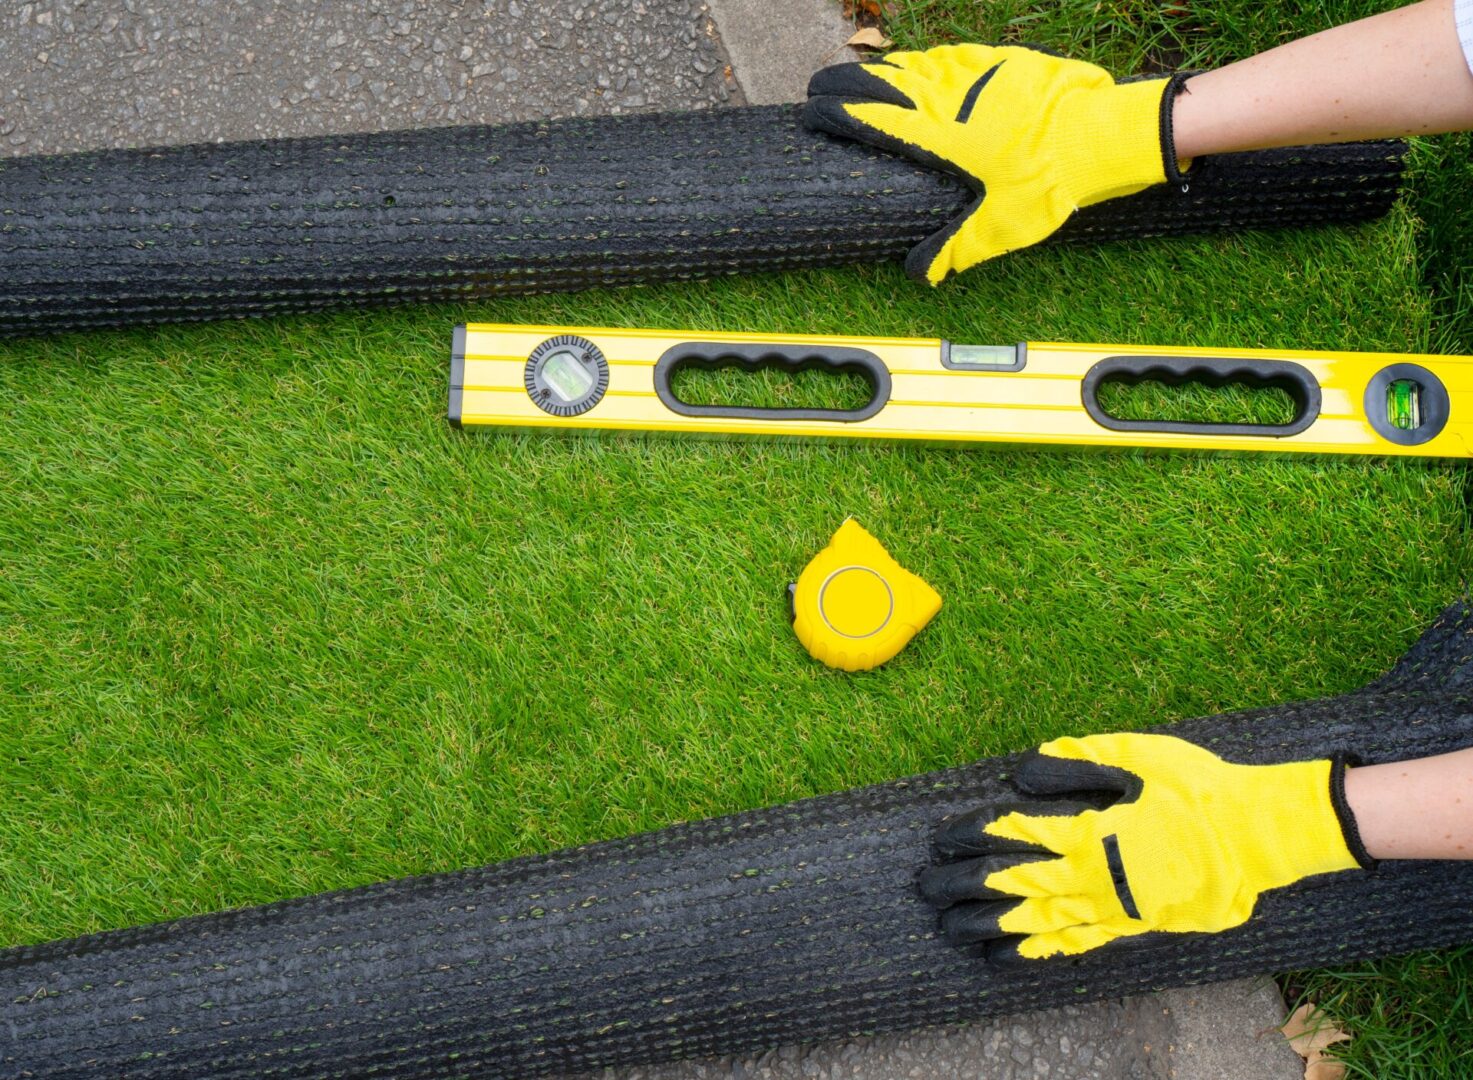 A pair of yellow gloves and a level on the ground